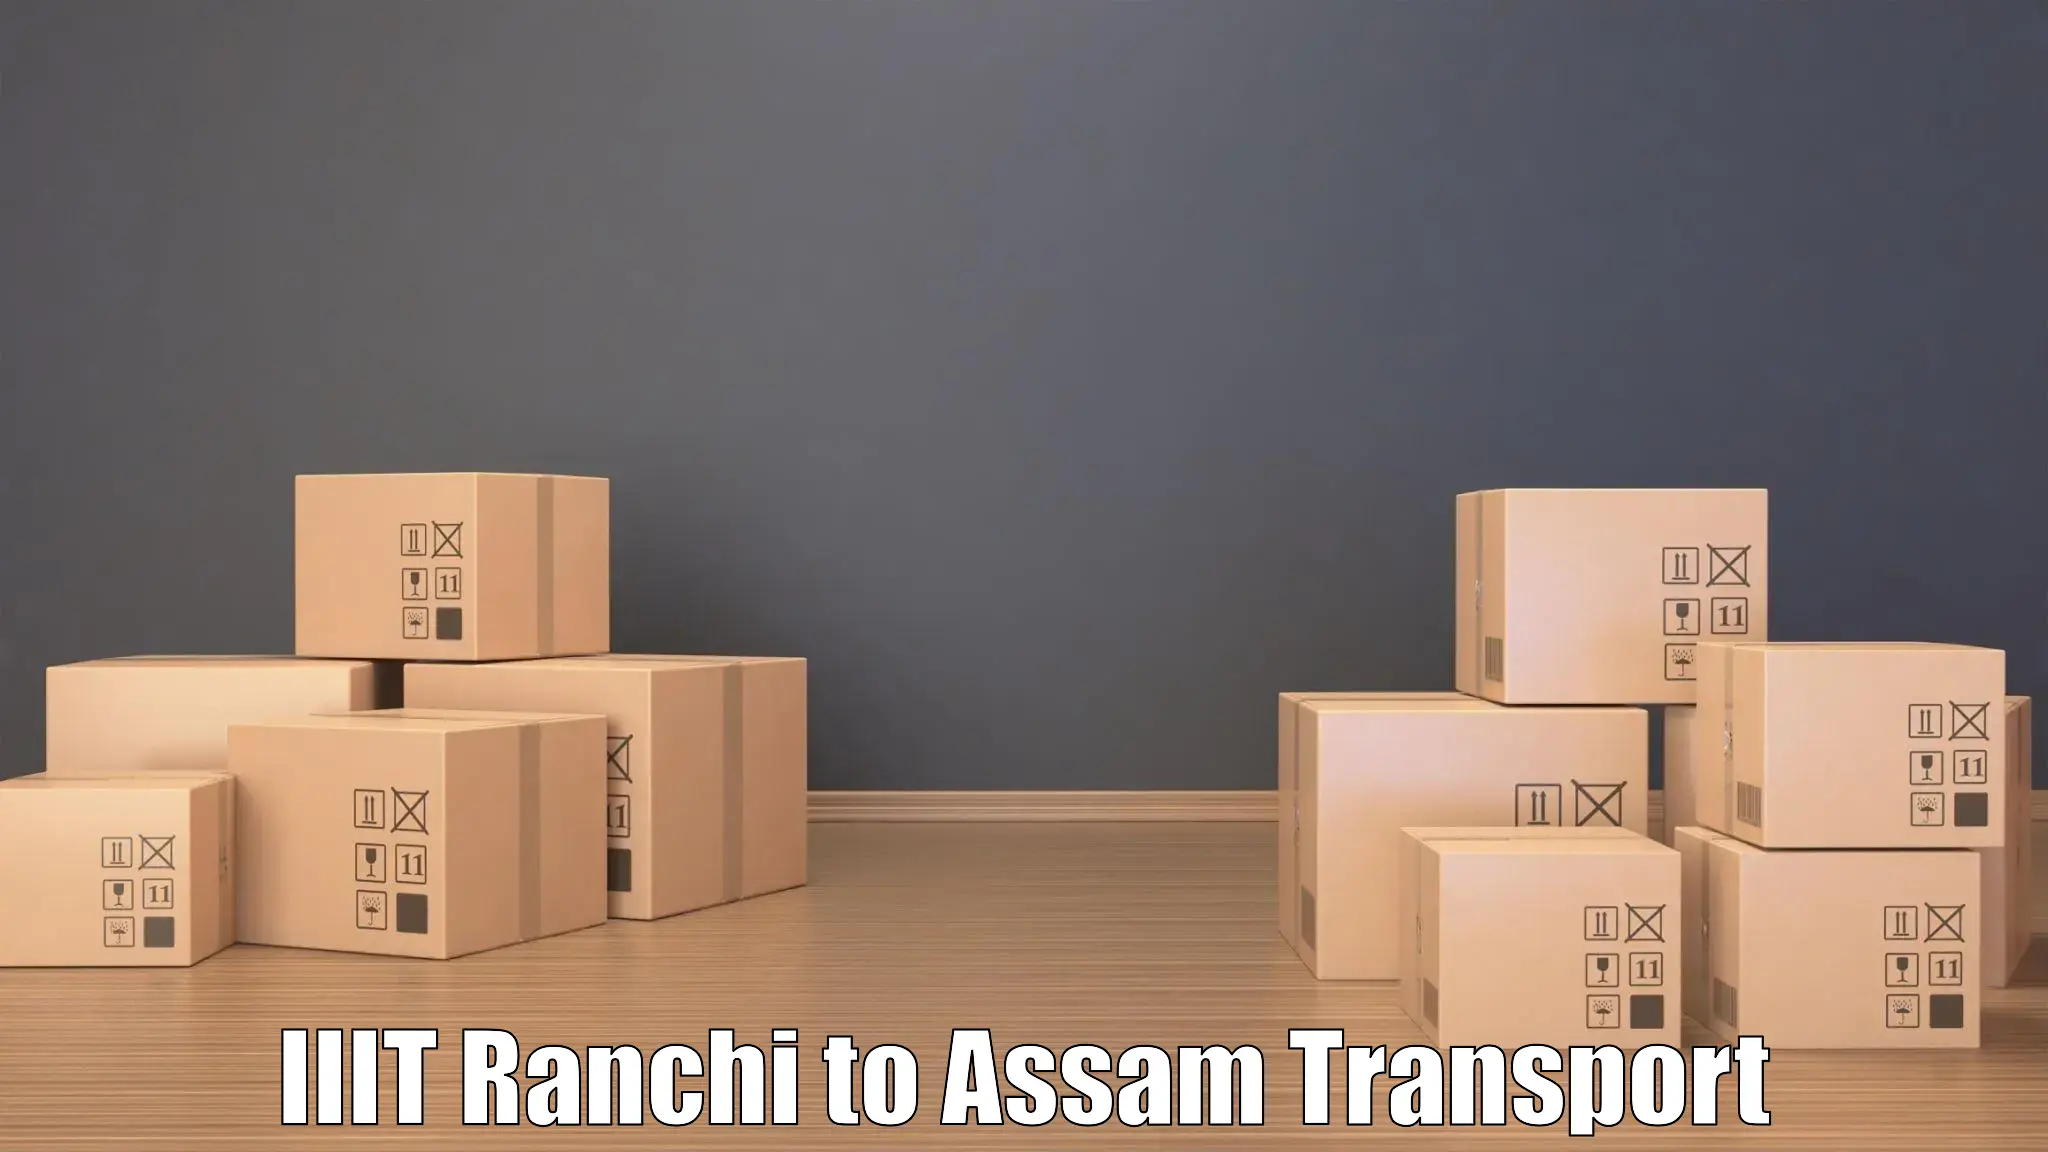 Delivery service IIIT Ranchi to Assam